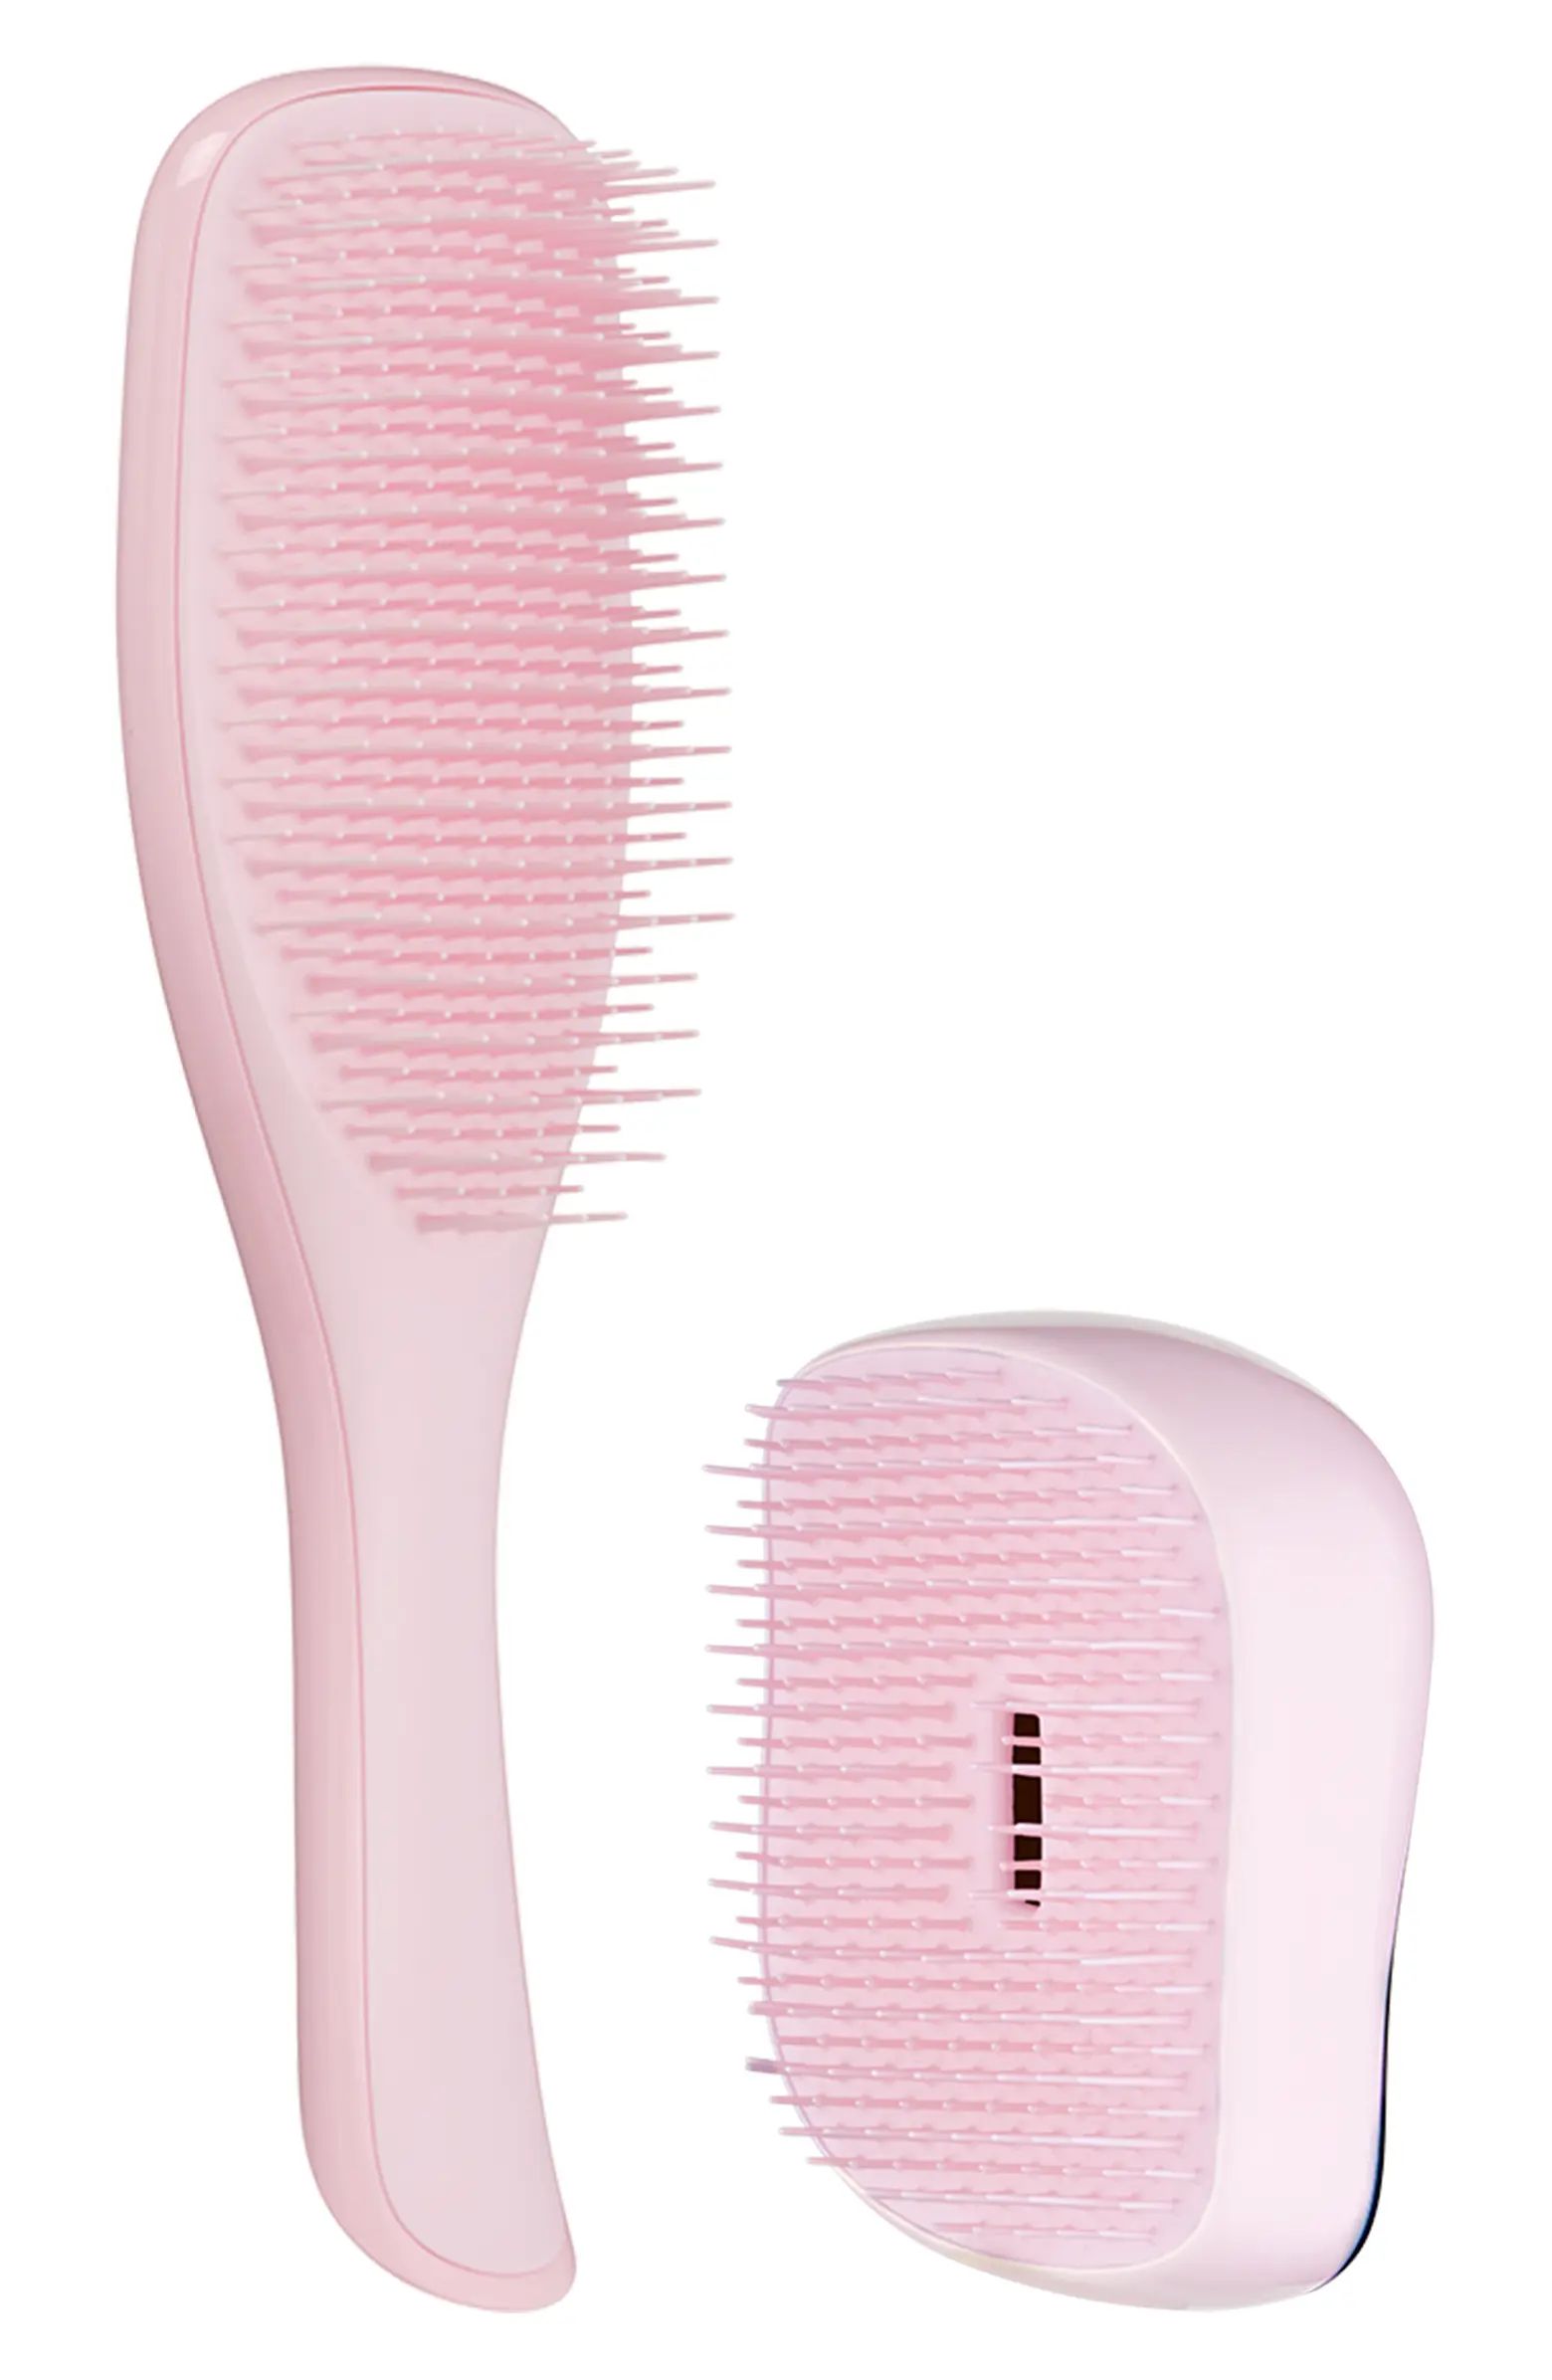 Compact & Ultimate Hairbrush Set $32.98 Value | Nordstrom